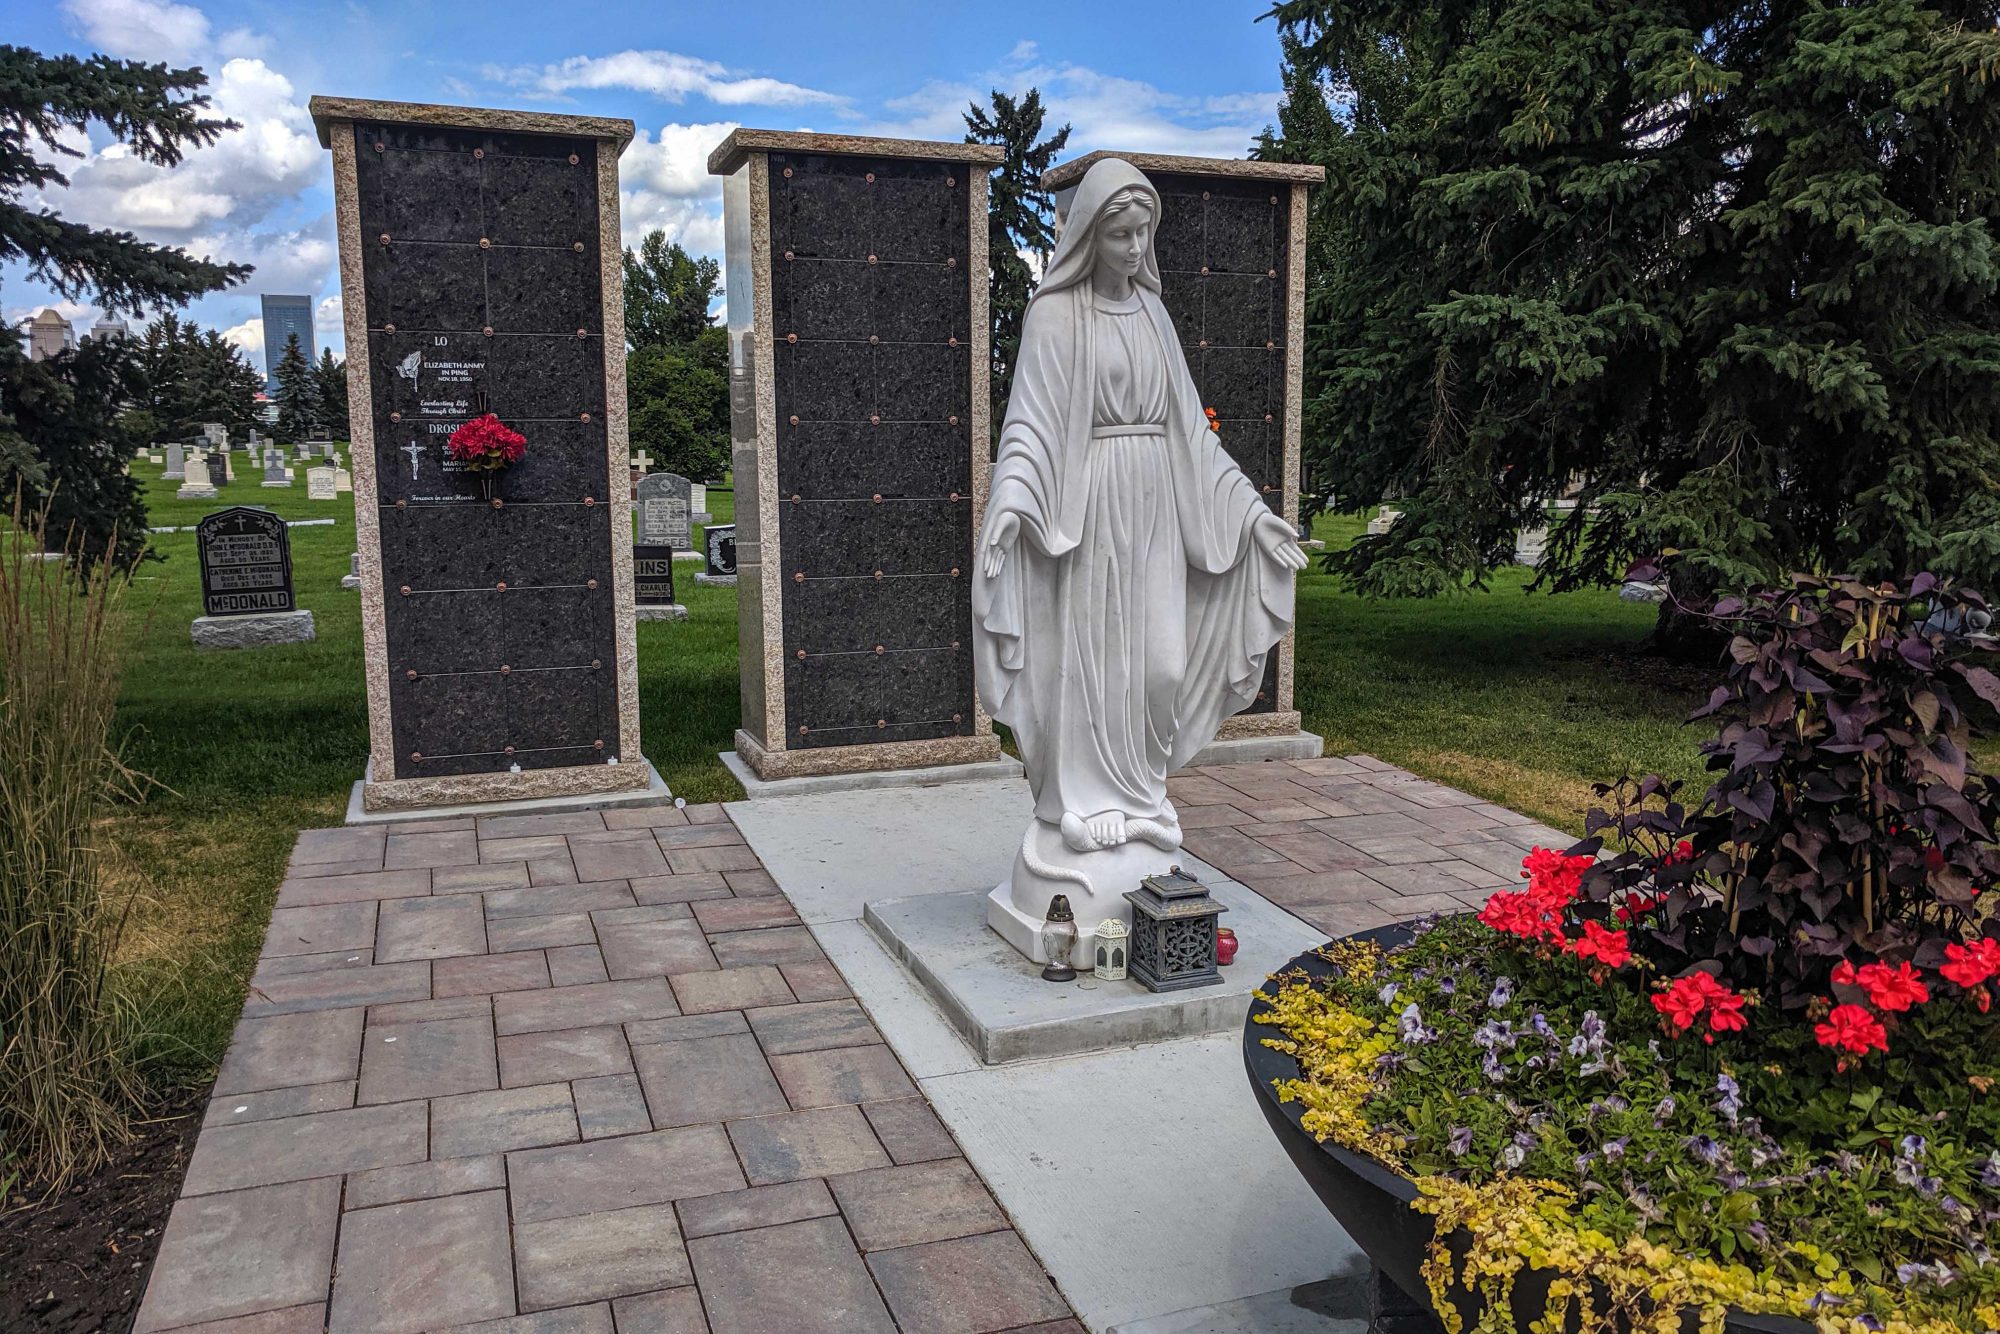 Granite statue of Mary sits in front of columbaria surrounded by trees and plantings. The cemetery is in view behind the columbaria.